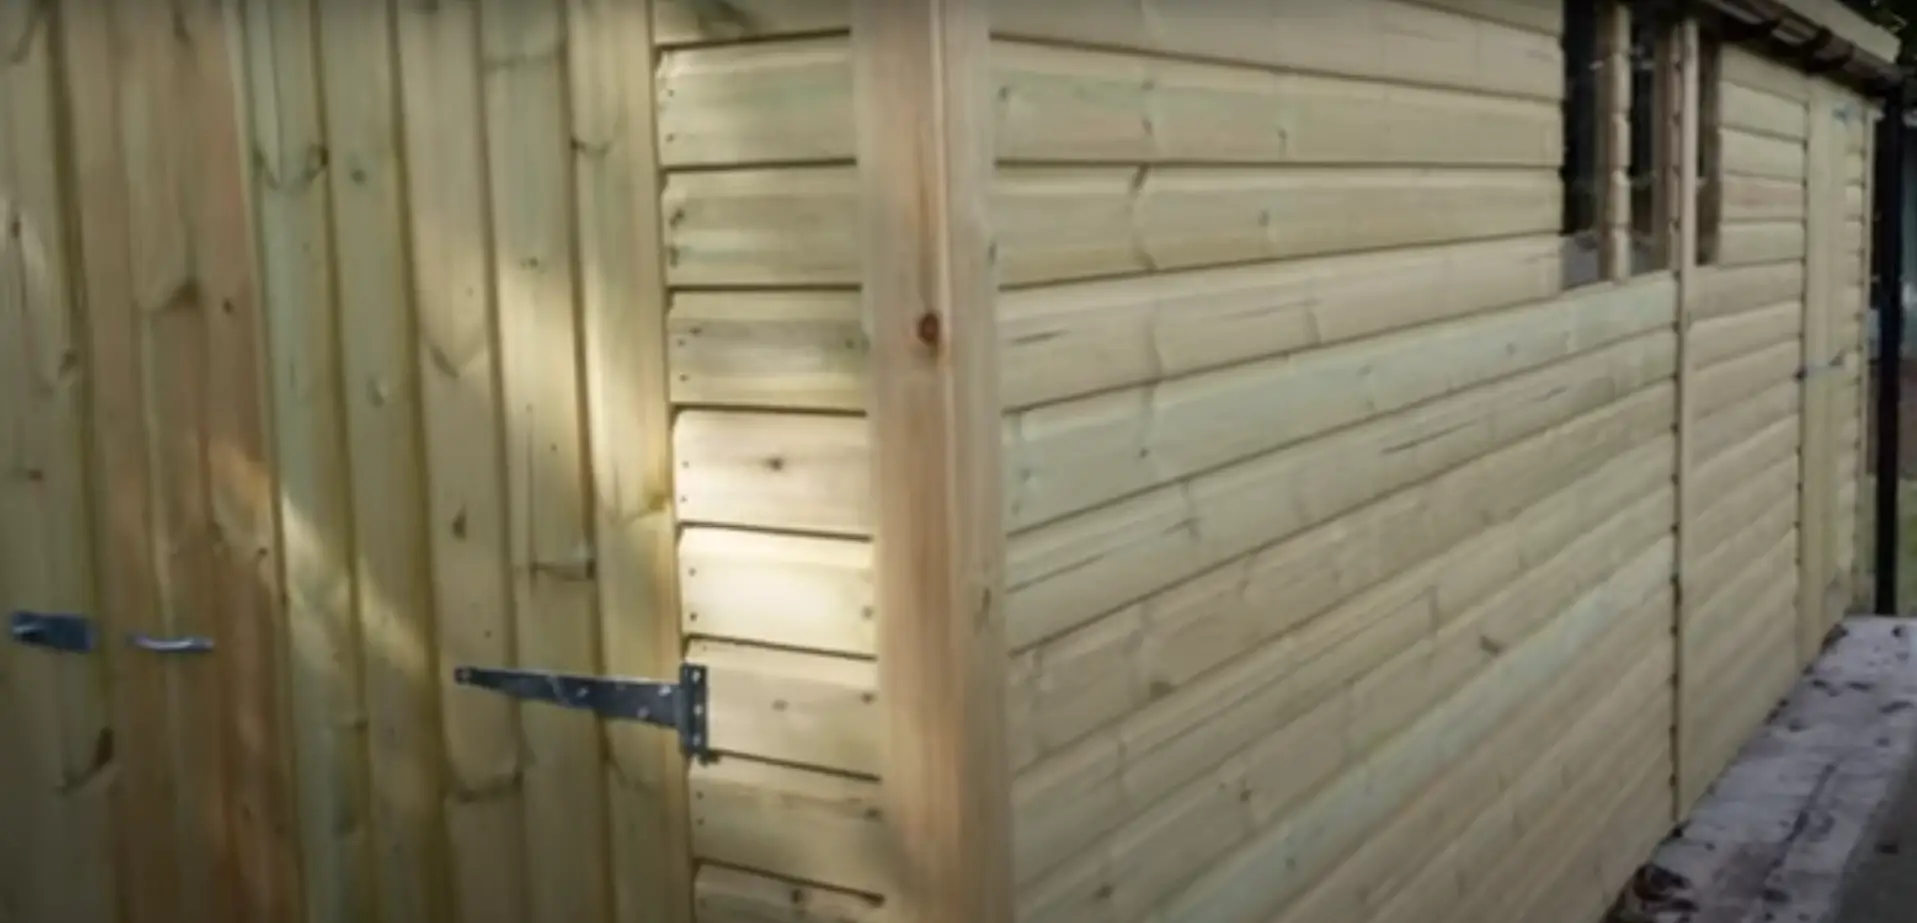 How Much Does It Cost to Run Electricity to a Shed?